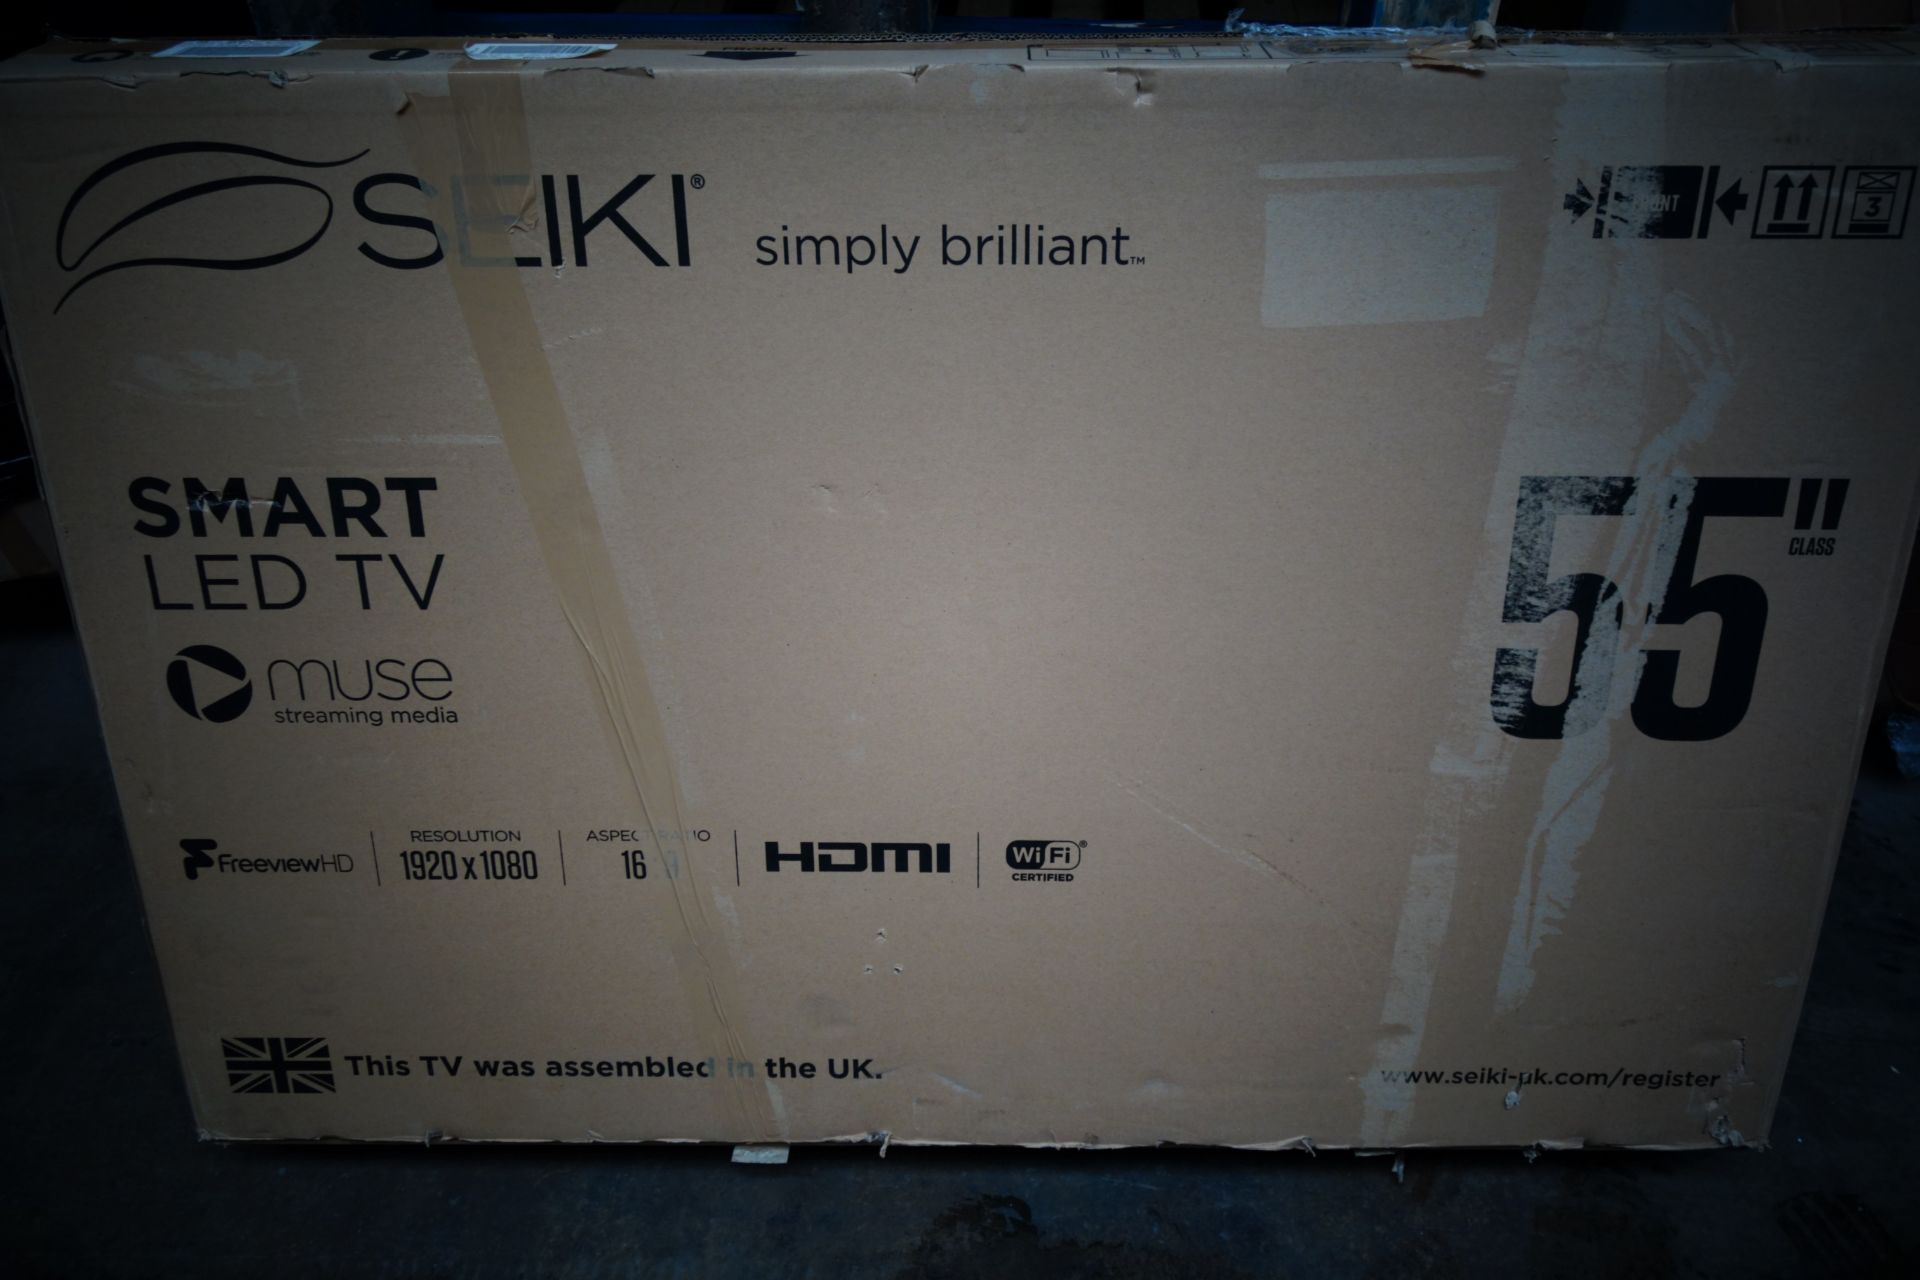 (T49) SEIKI 55 Inch Smart LED TV. Muse Music Media, Freeview HD. Resolution 1920 x 1080. HDMI.